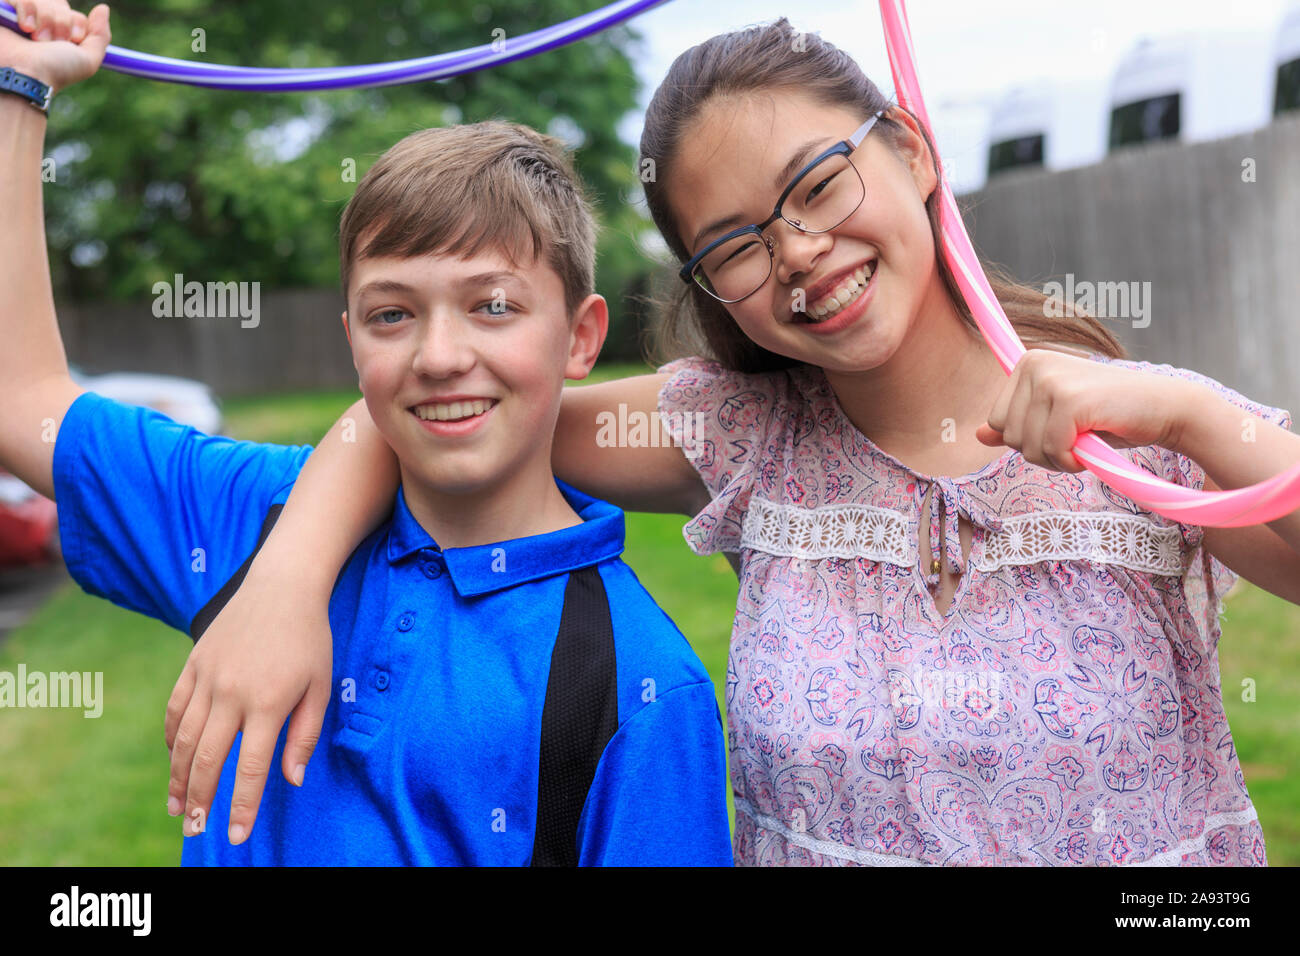 Teens girl who has Learning Disability playing hula hoops with her brother Stock Photo